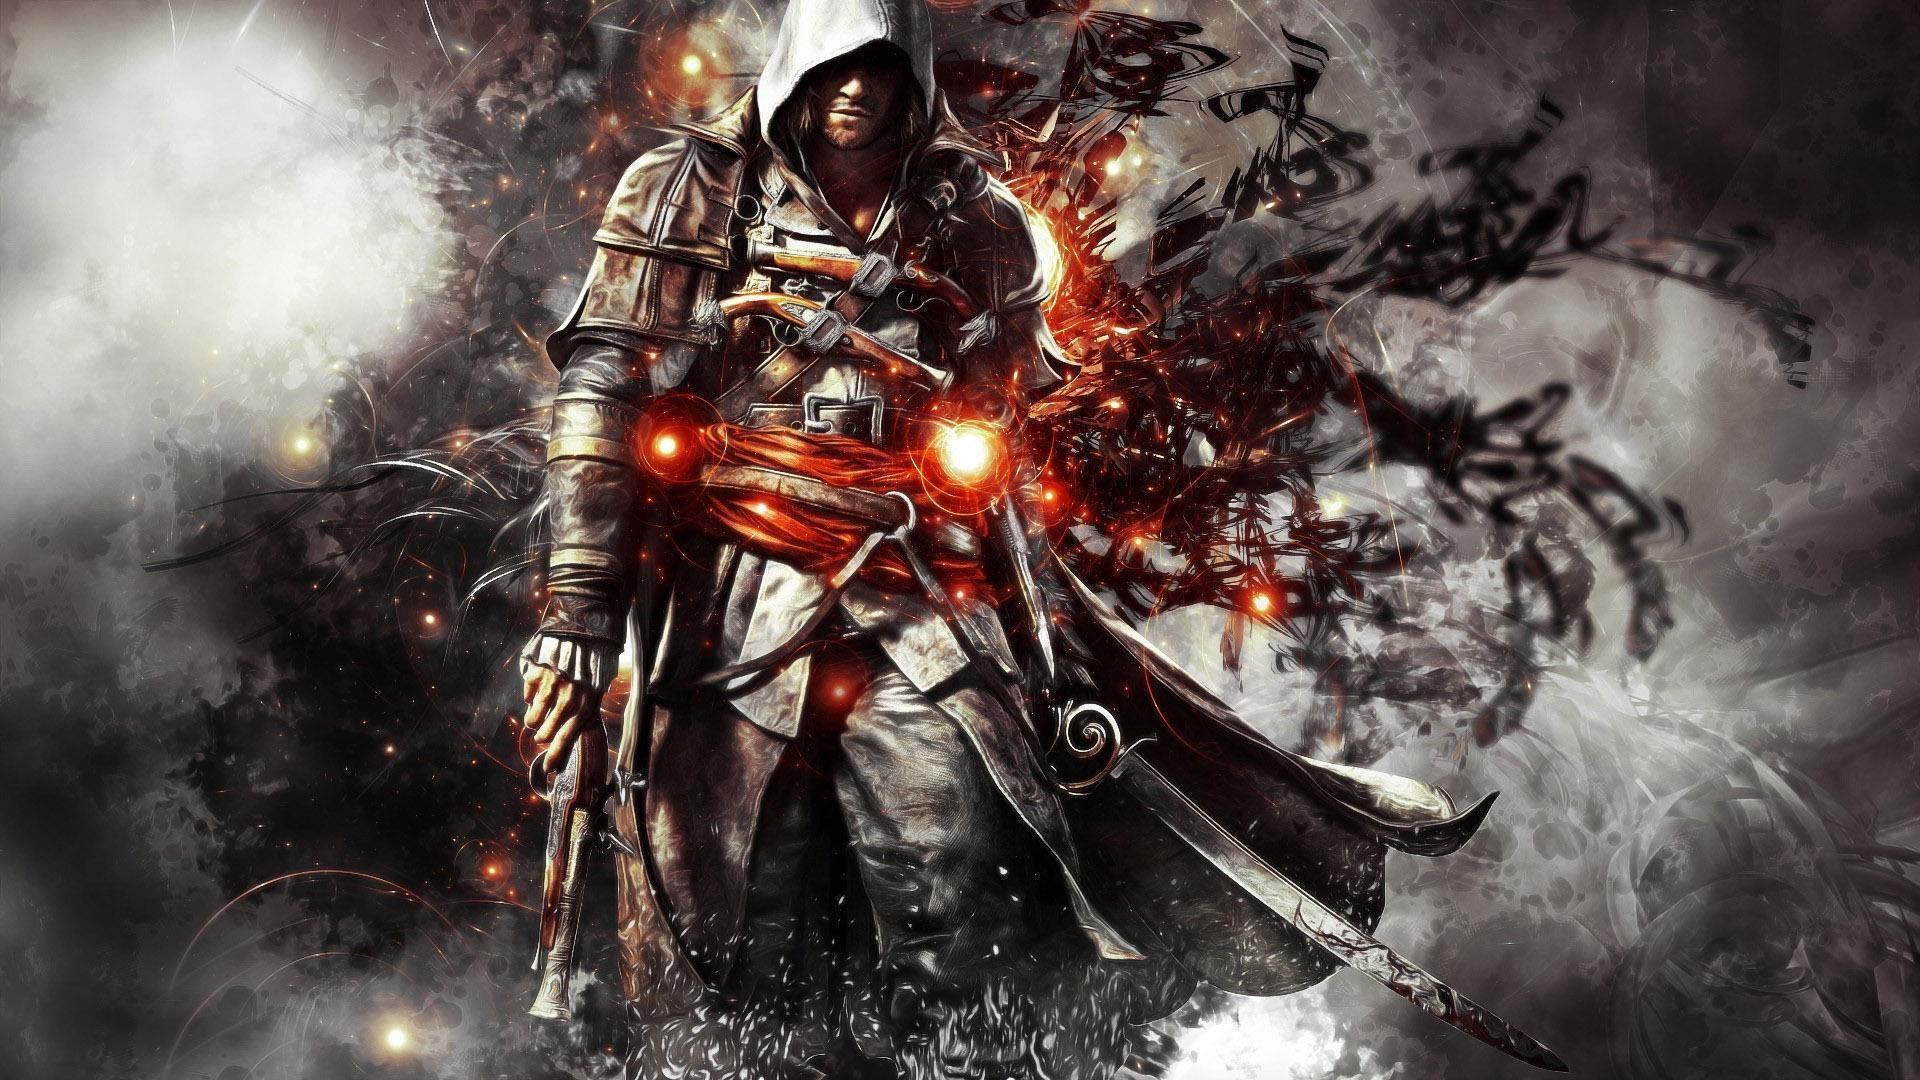 hd games wallpapers 1080p